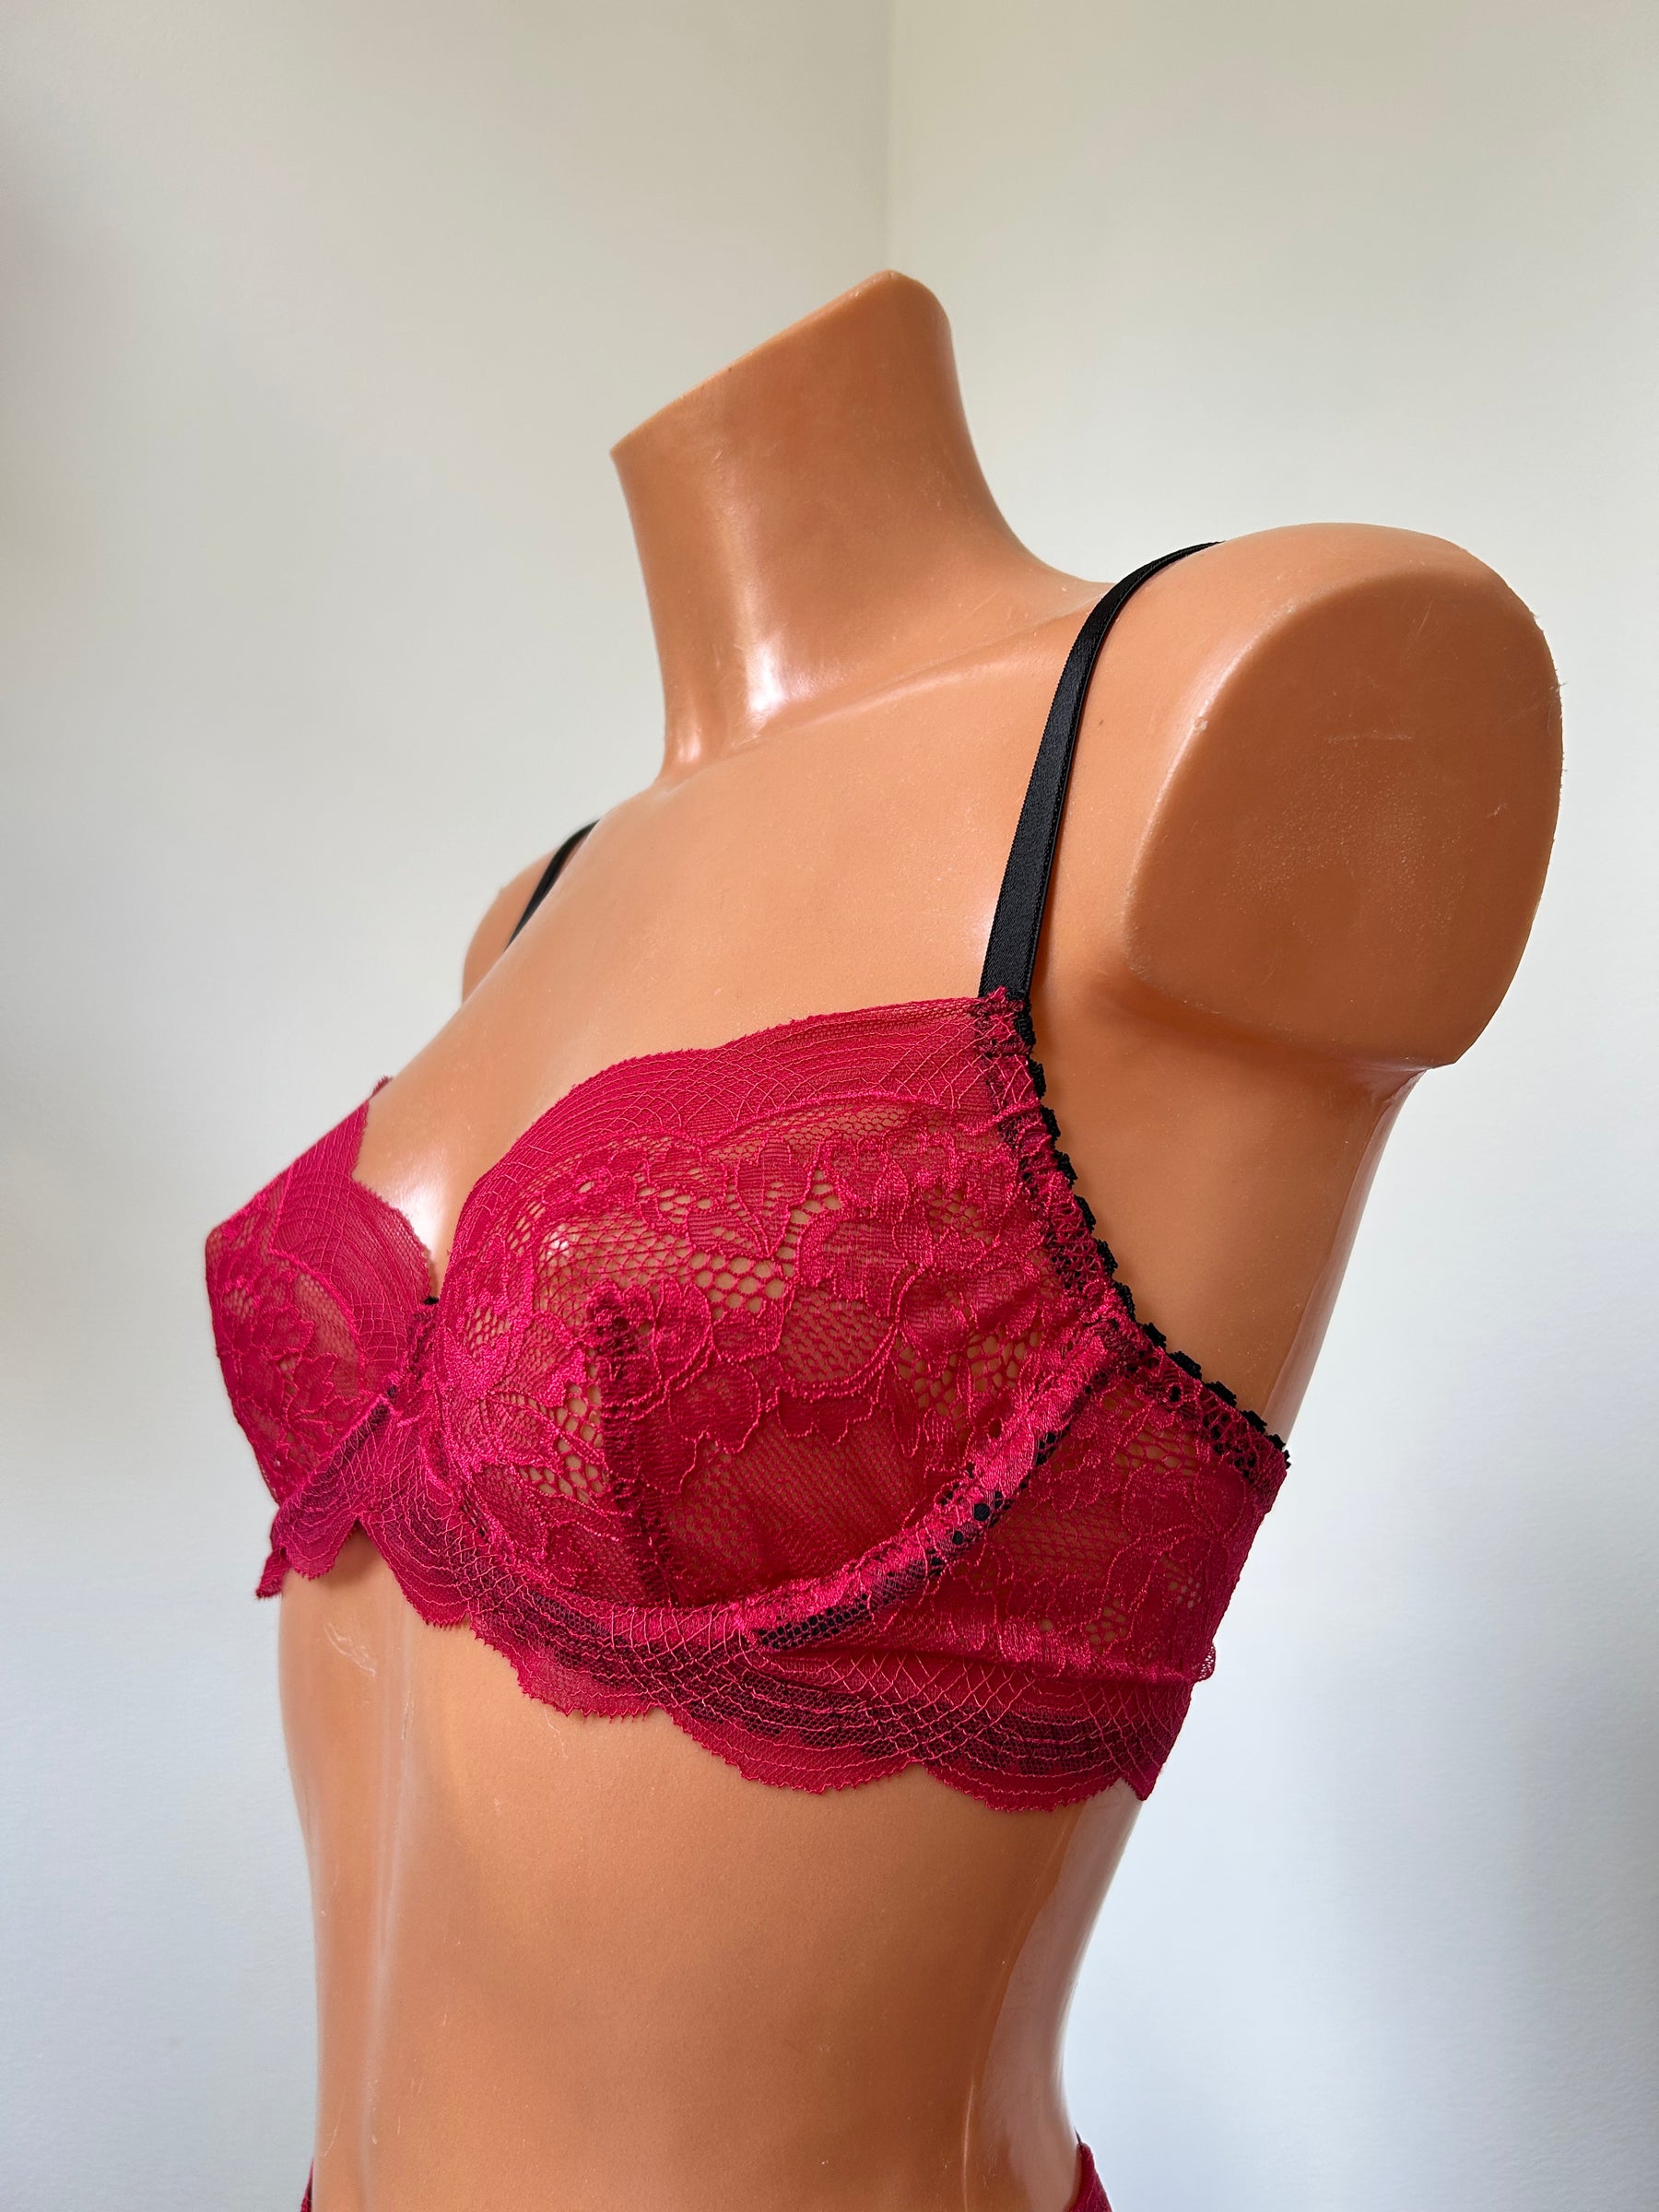 "Ruby" cherry red lingerie set